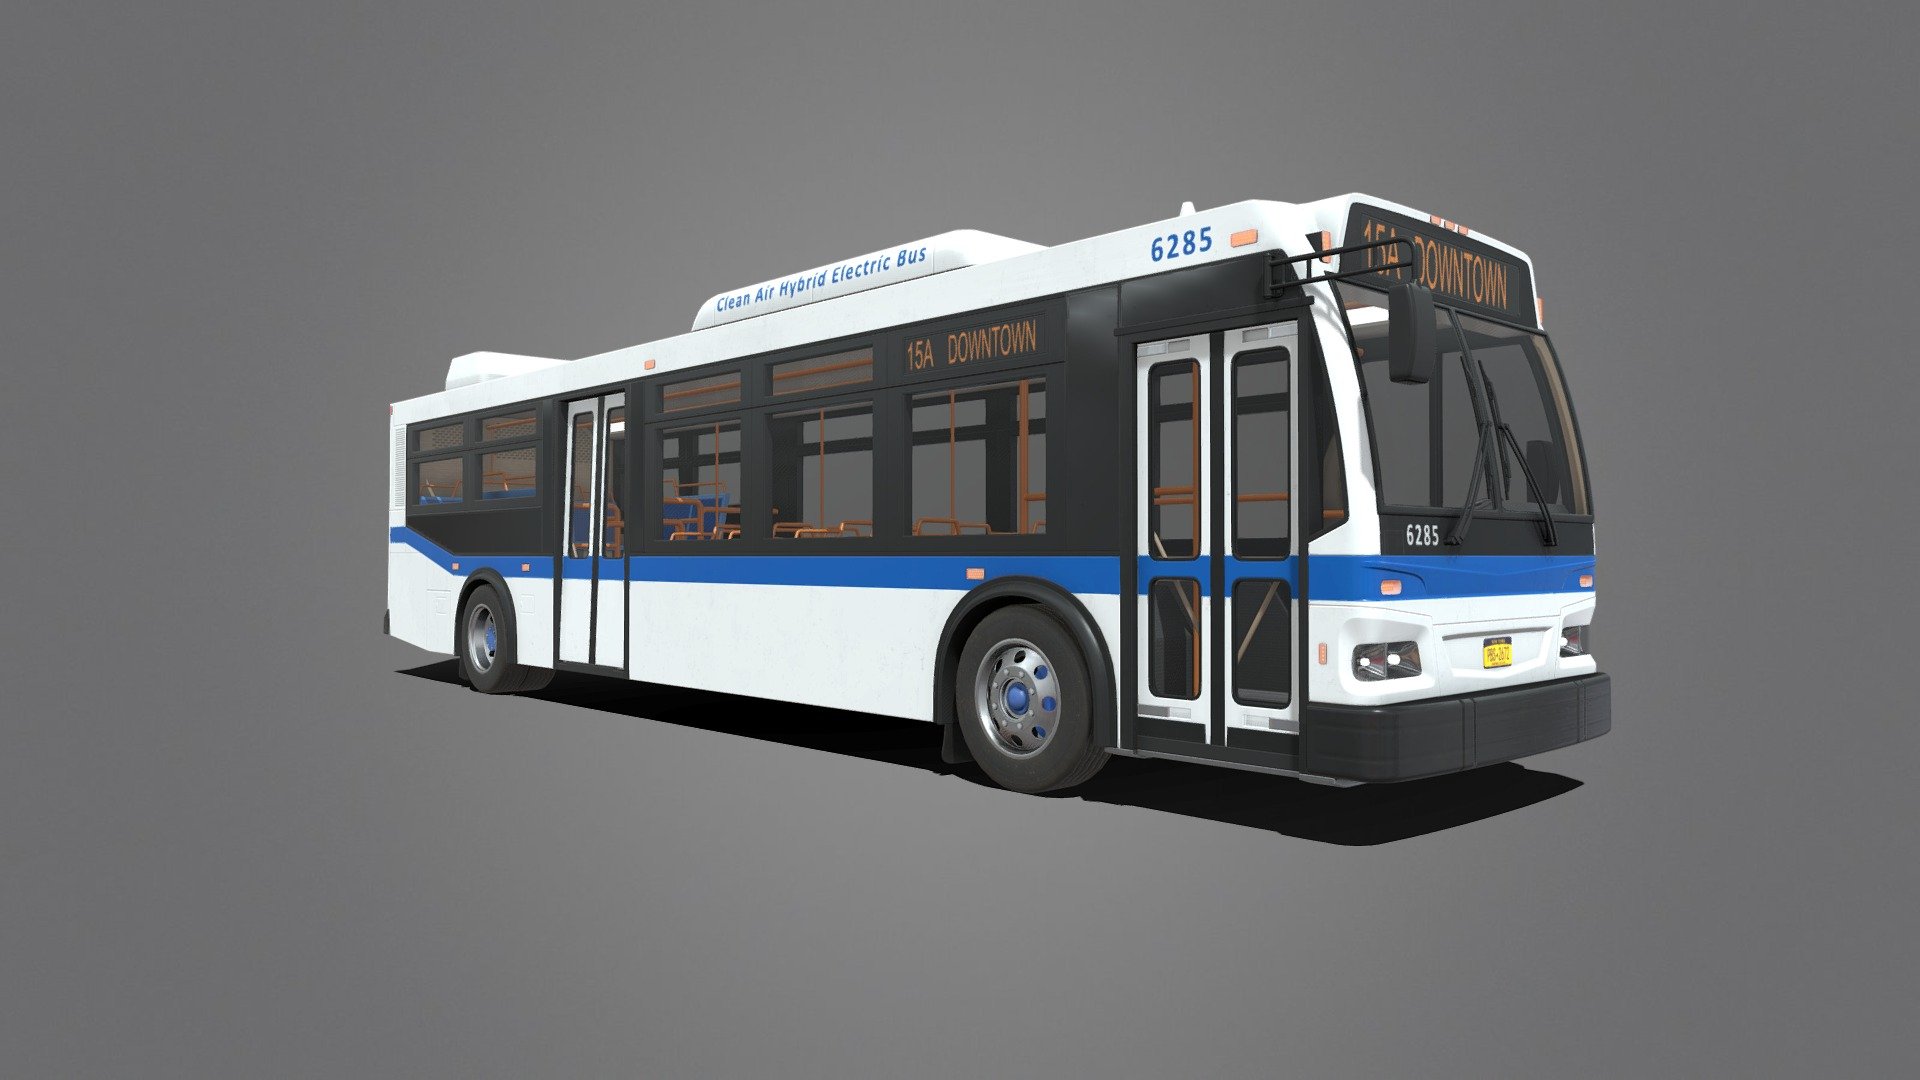 Low-poly PBR 3D model of City Bus.

This 3D model is best for use in games and other VR / AR, real-time applications such as Unity or Unreal Engine. It can also be rendered in Blender (ex Cycles) or Vray as the model is equipped with all required PBR textures.  

Technical details:




5 PBR textures sets. (Main Body, Interior, Wheels, Alpha, Emission) 

38066 Triangles

36671 Vertices

The model is divided into few objects (Main Body, Wheels, Doors etc)

Lot of additional file formats included (Blender, Unity, UE4 Maya etc.)  

More file formats are available in additional zip file on product page.

Please feel free to contact me if you have any questions or need any support for this asset.

Support e-mail: support@rescue3d.com - City Bus - Buy Royalty Free 3D model by Rescue3D Assets (@rescue3d) 3d model